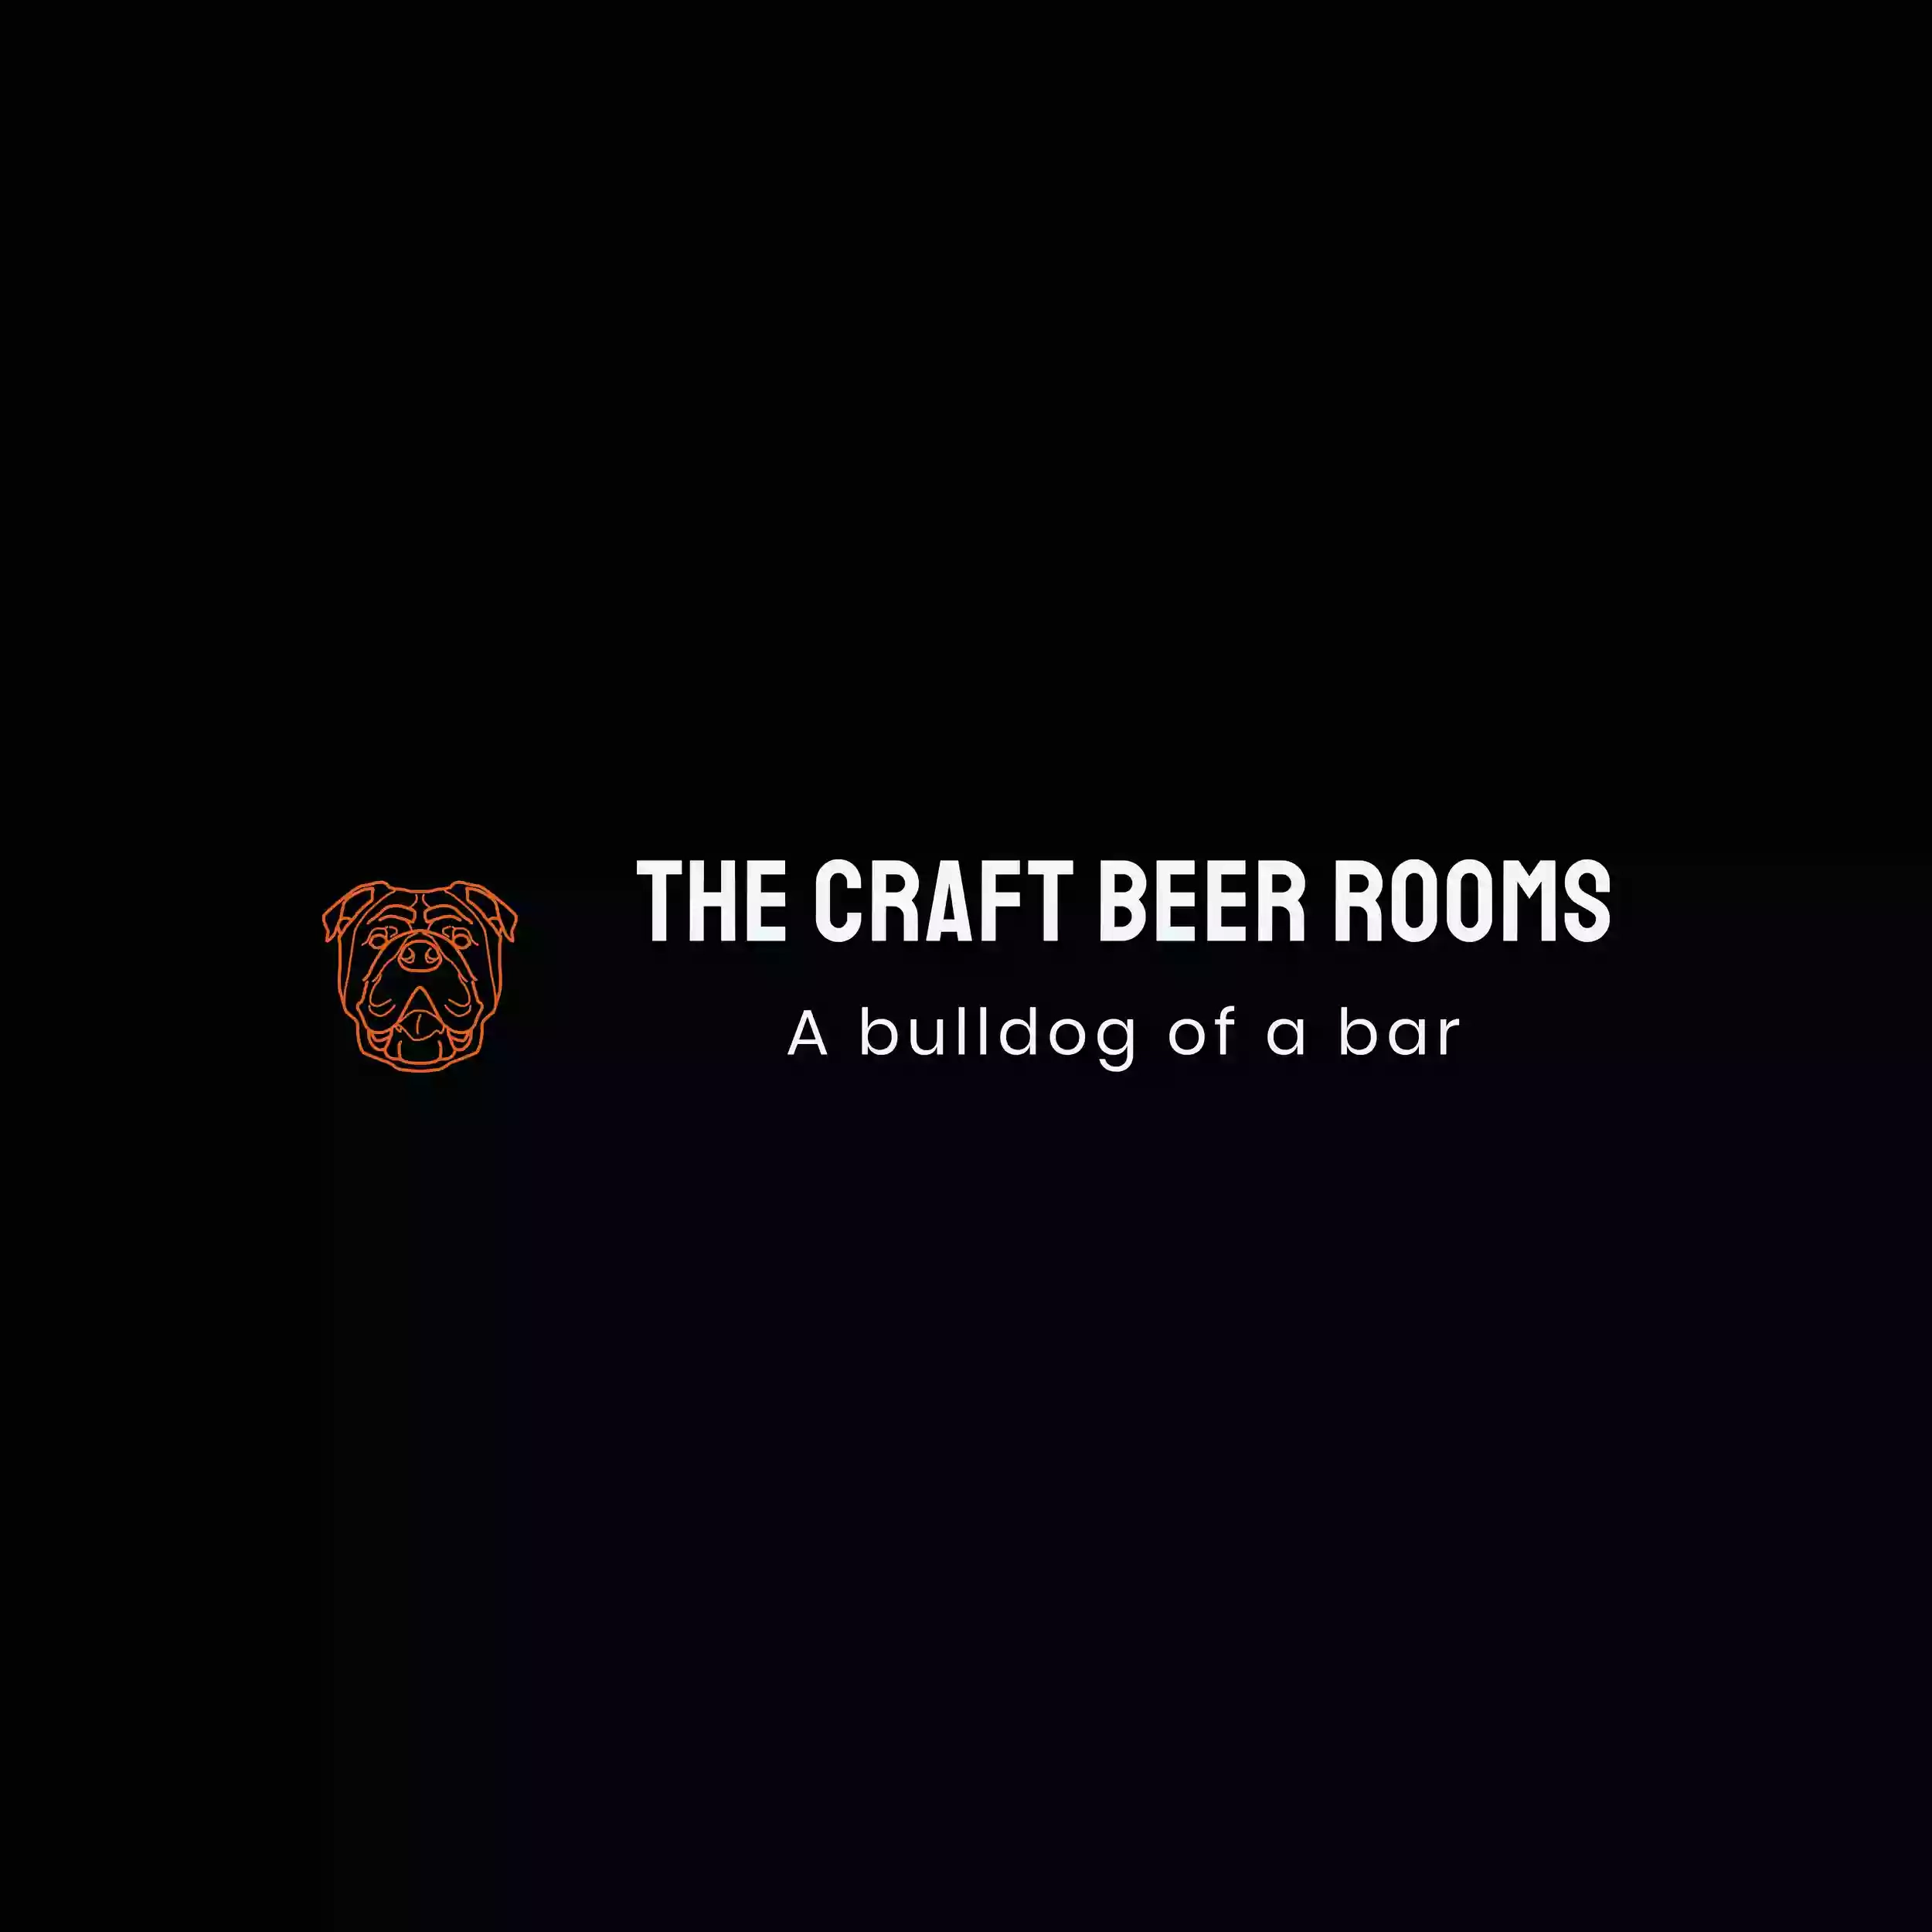 The Craft Beer Rooms